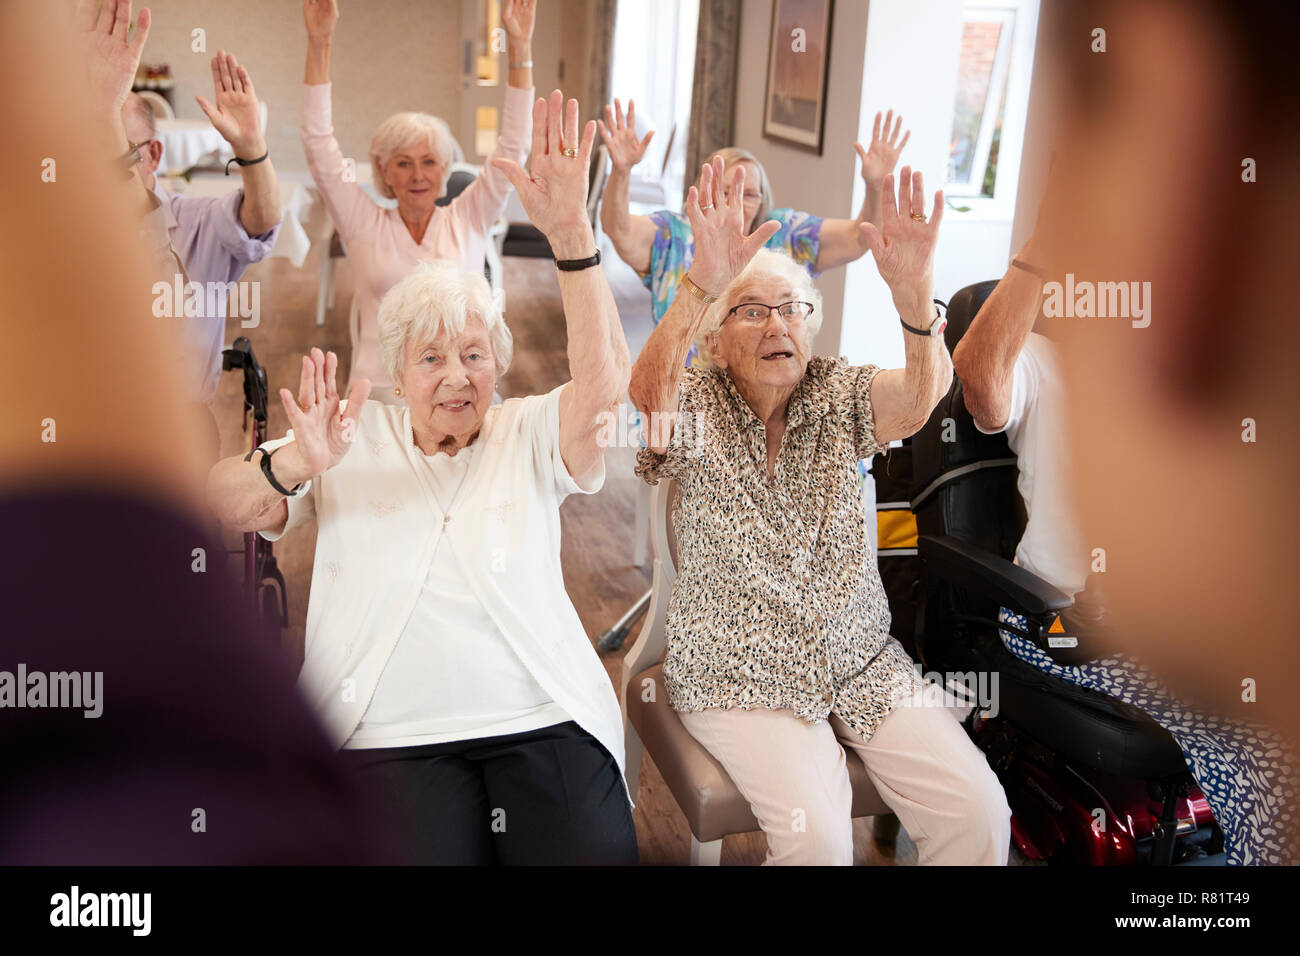 Carer Leading Group Of Seniors In Fitness Class In Retirement Home Stock Photo